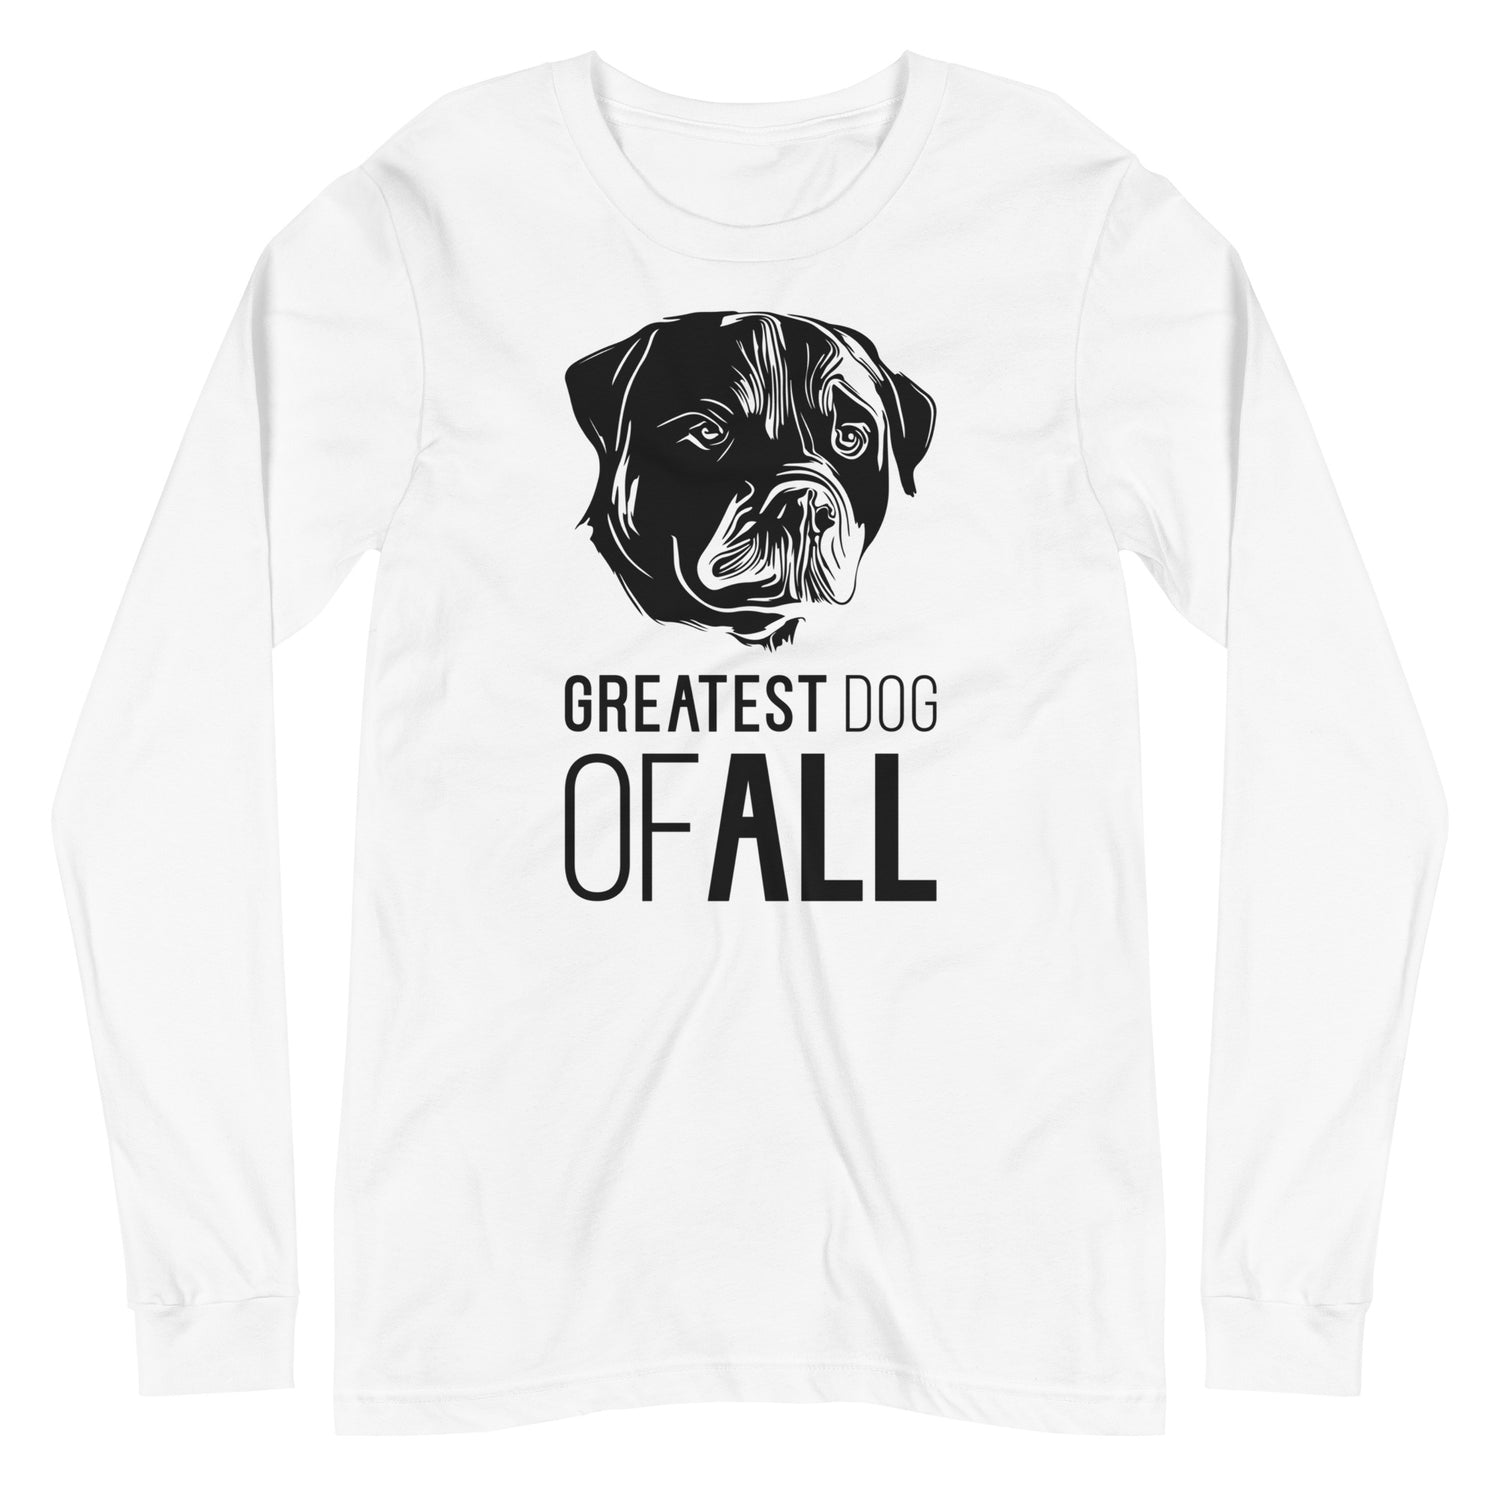 Black Rottweiler face silhouette with Greatest Dog of All caption on unisex white long sleeve t-shirt